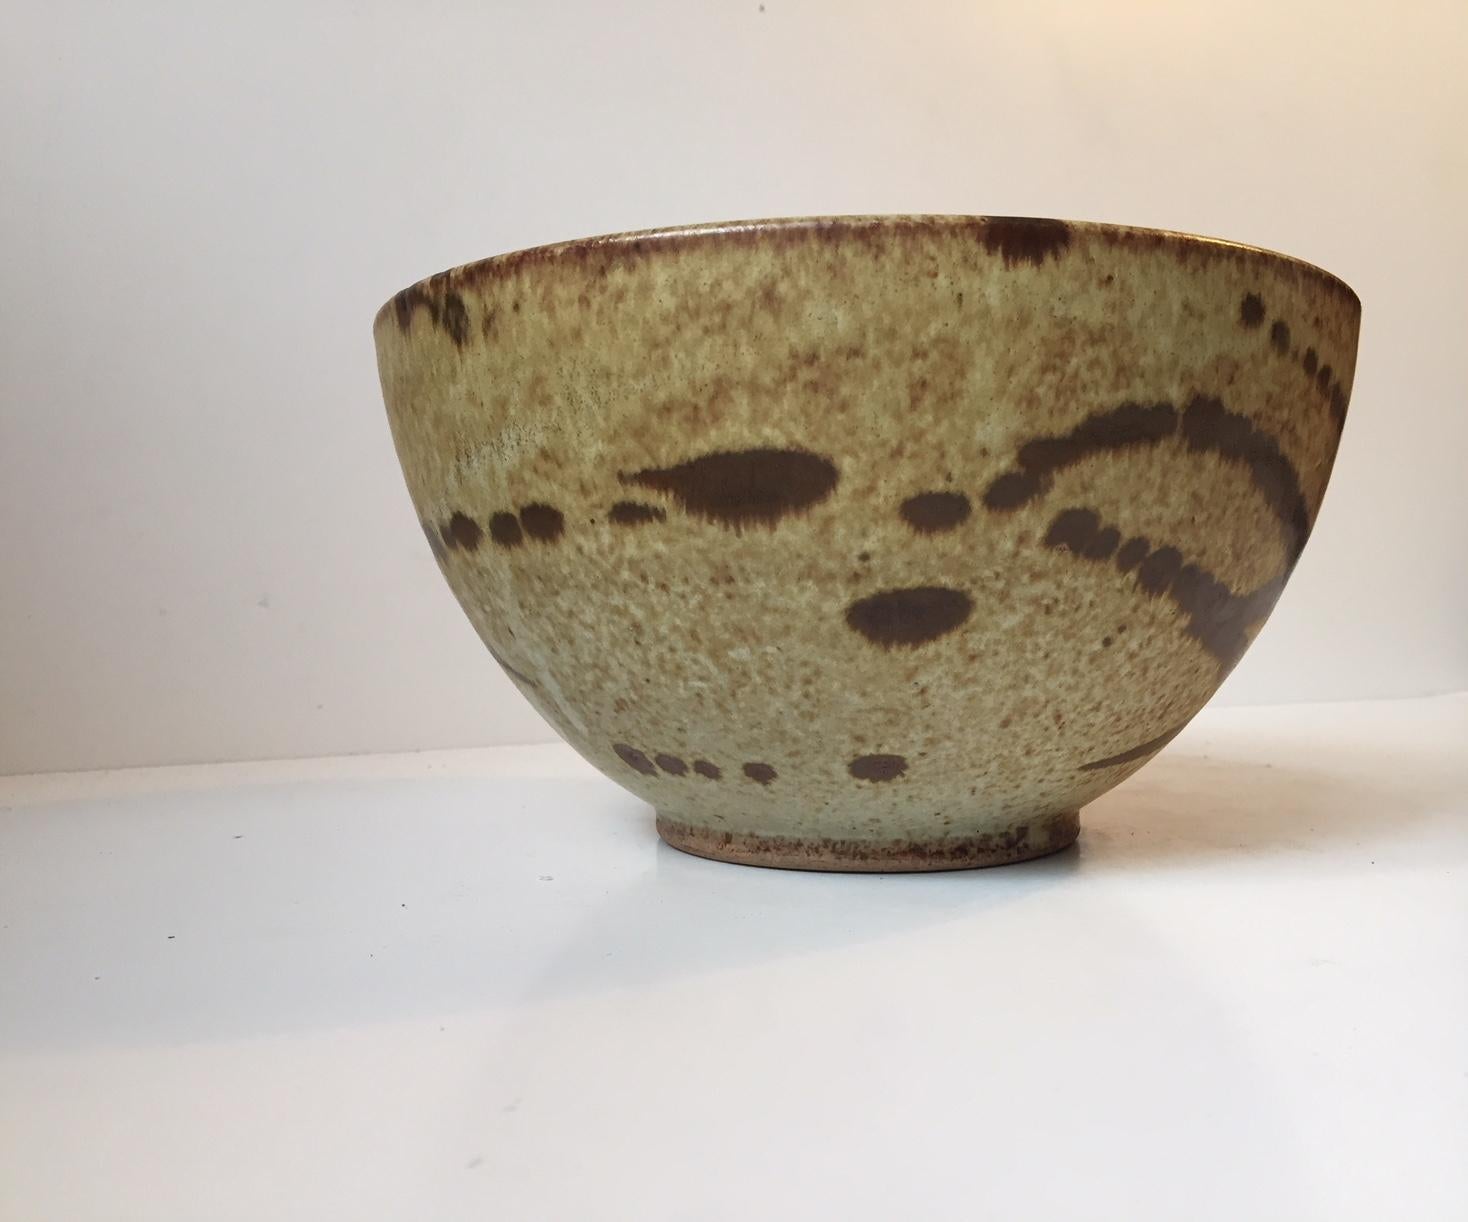 Uniquely decorated stoneware bowl in earthy glazes by the Danish ceramist Aage Würtz. Designed and created at his own studio in Copenhagen during the 1970s. Its signed to the base.